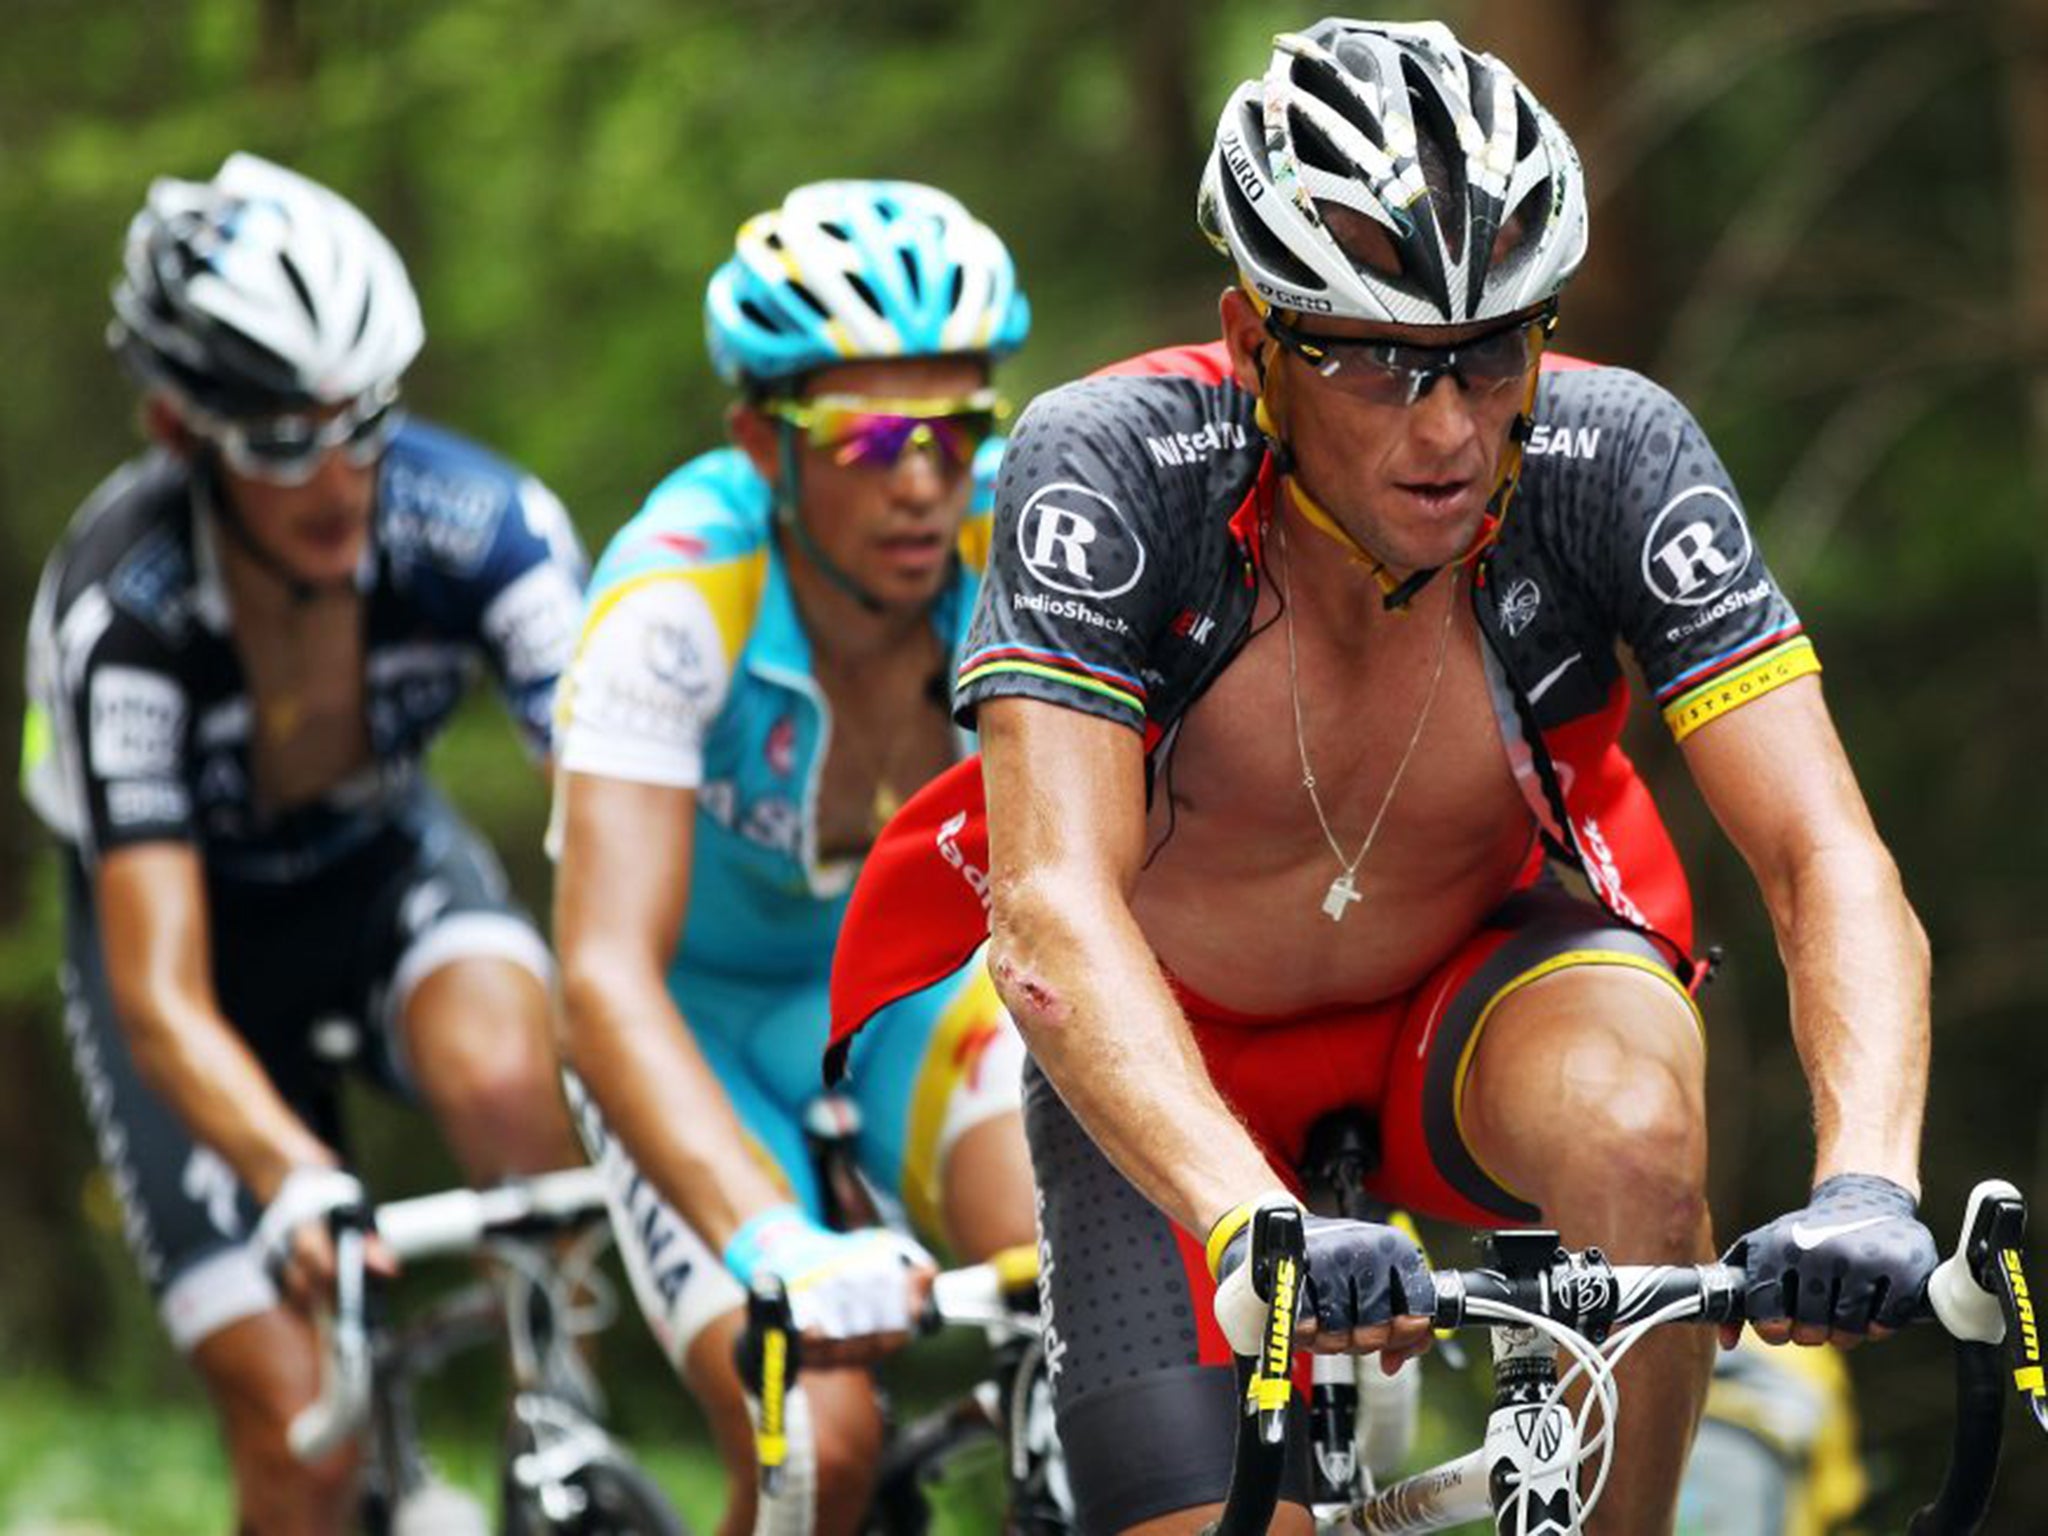 Lance Armstrong was eventually caught by the American anti-doping agency USADA